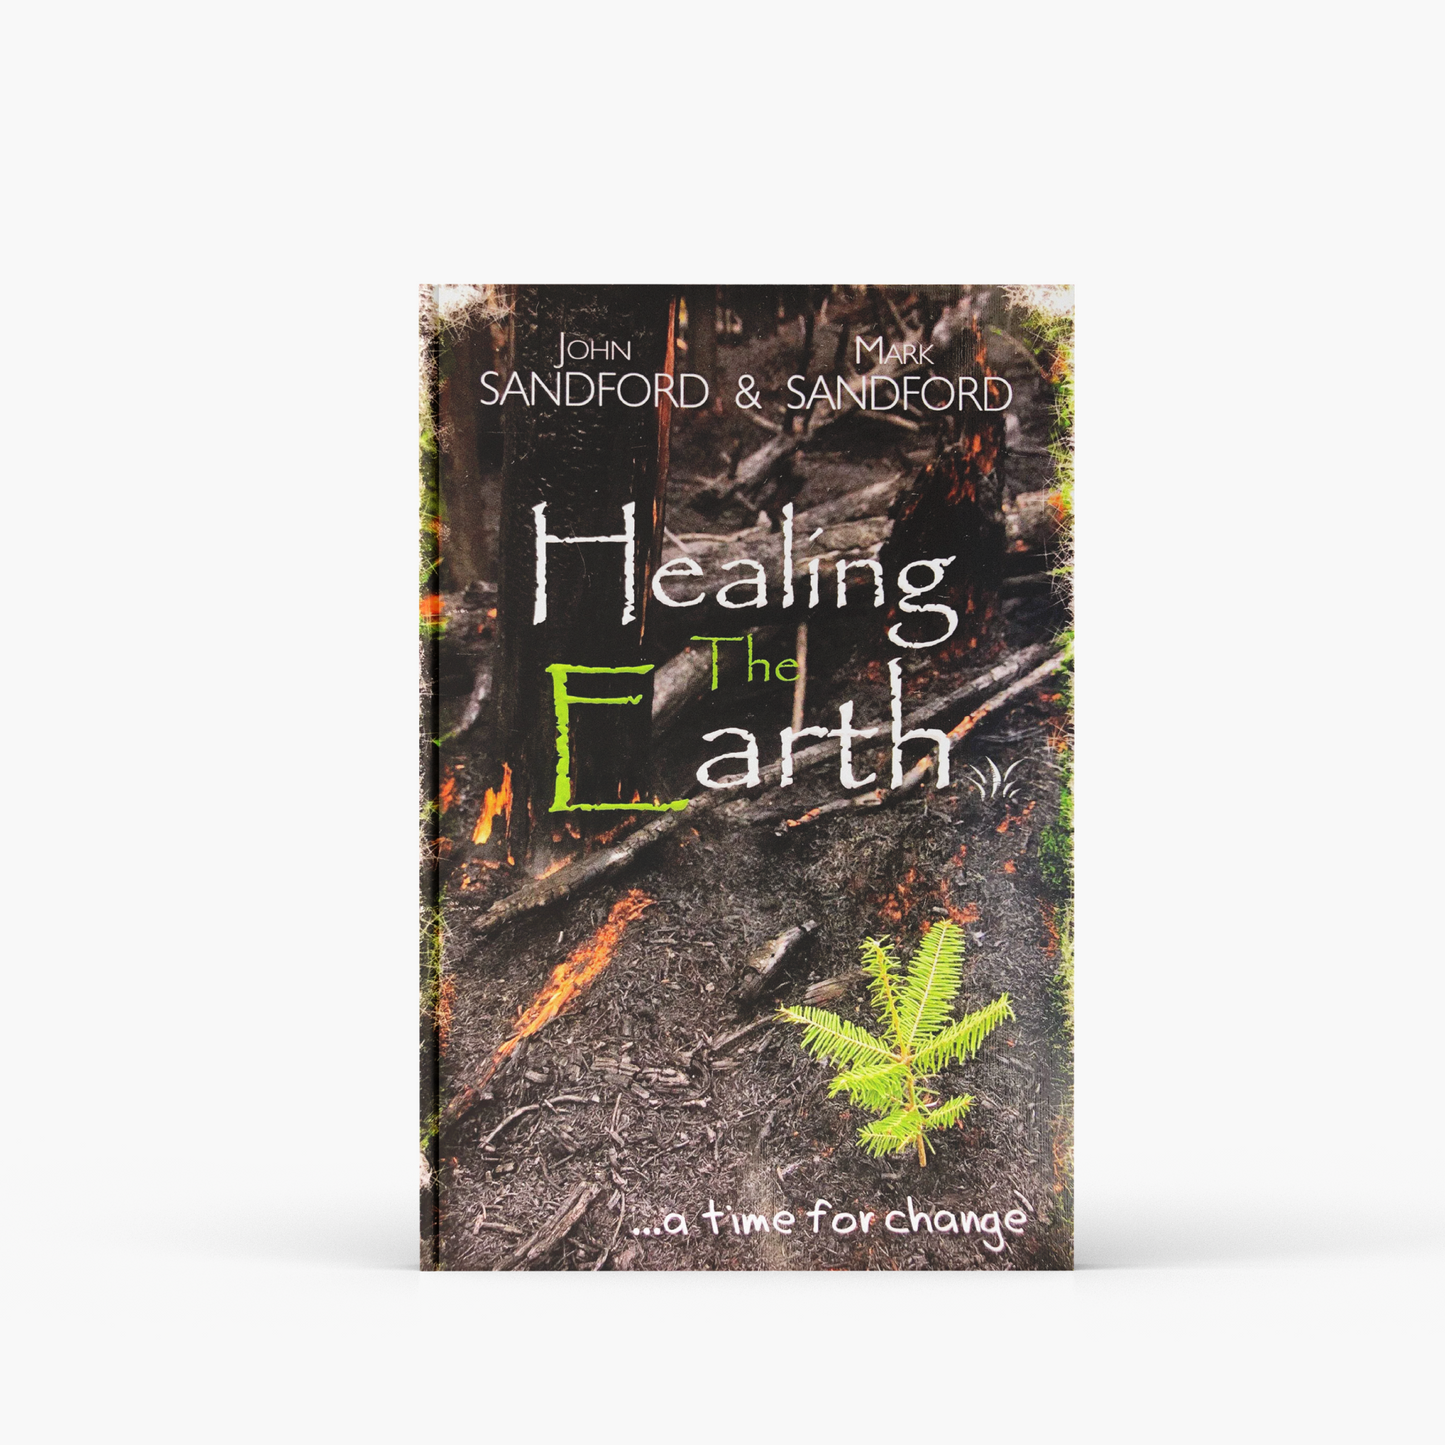 Healing the Earth: A Time for Change